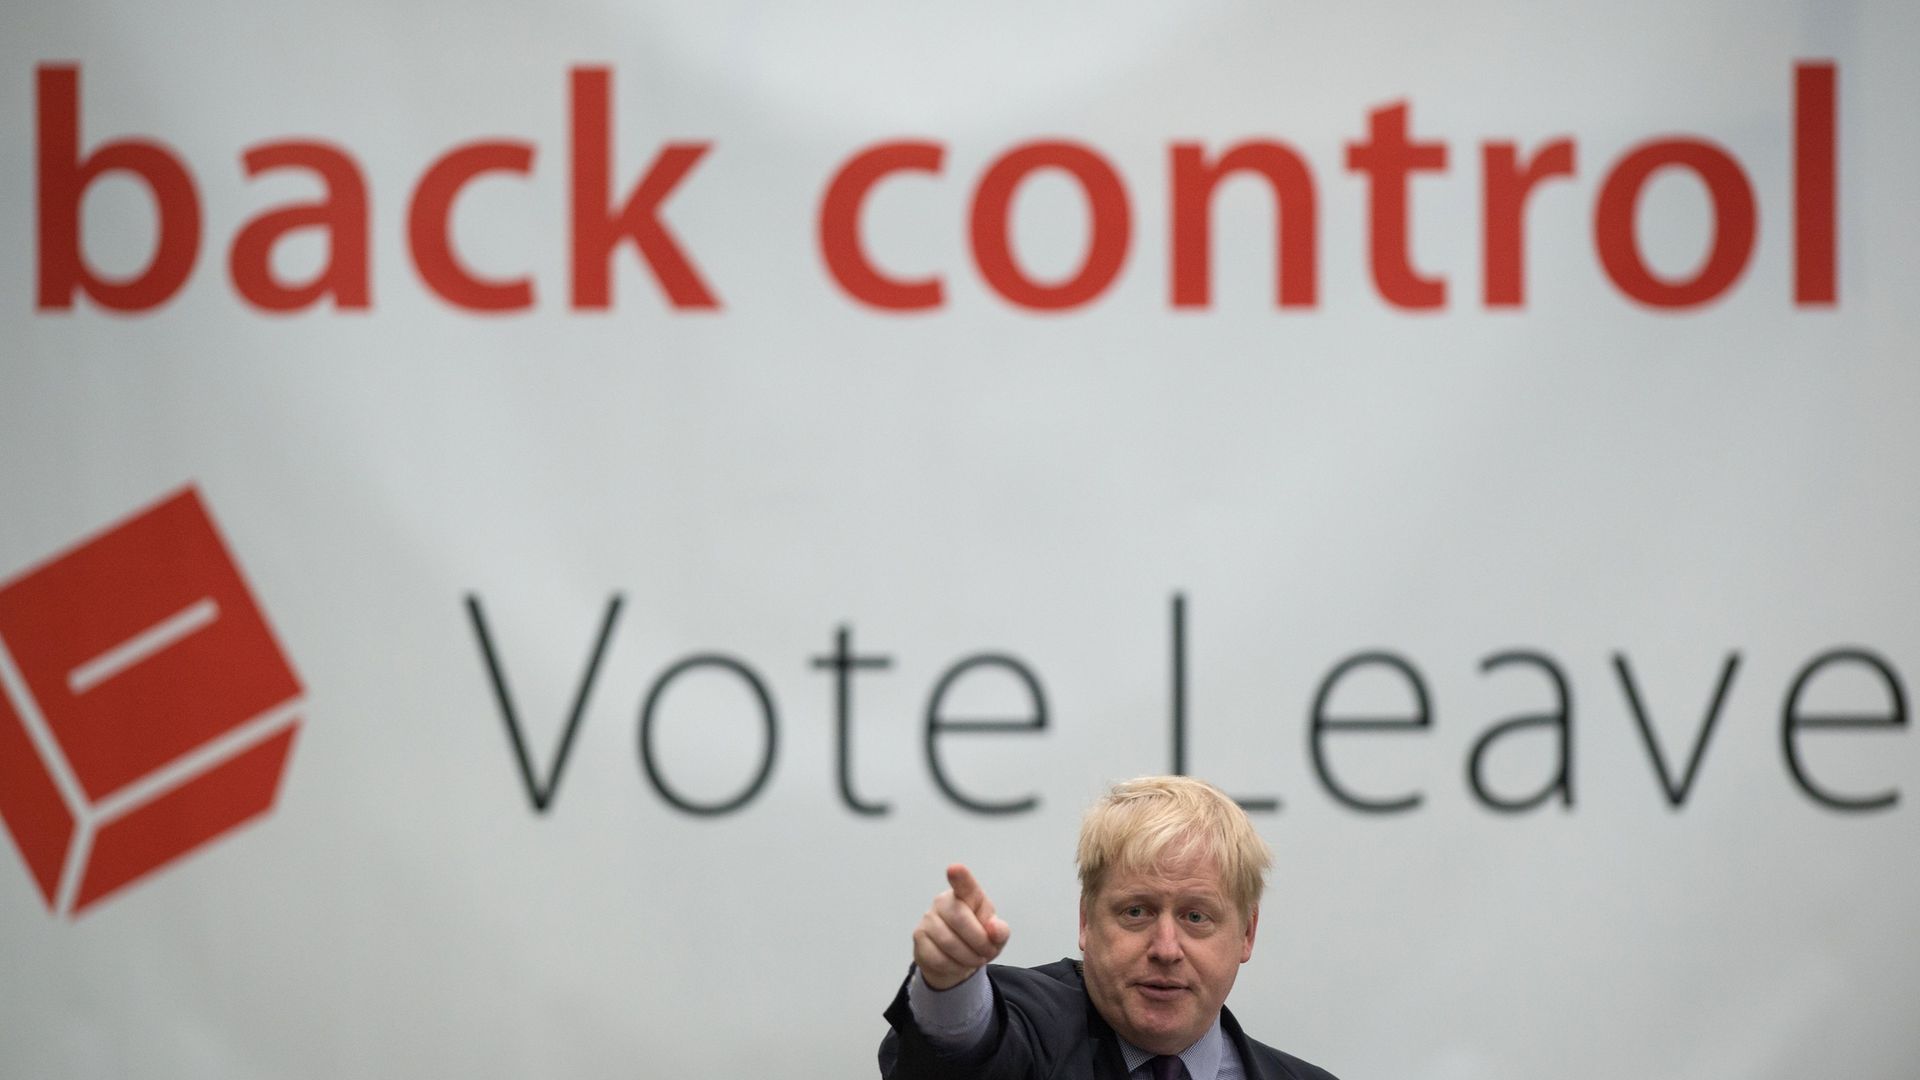 Mayor of London Boris Johnson delivers a speech during a Vote Leave campaign event - Credit: PA